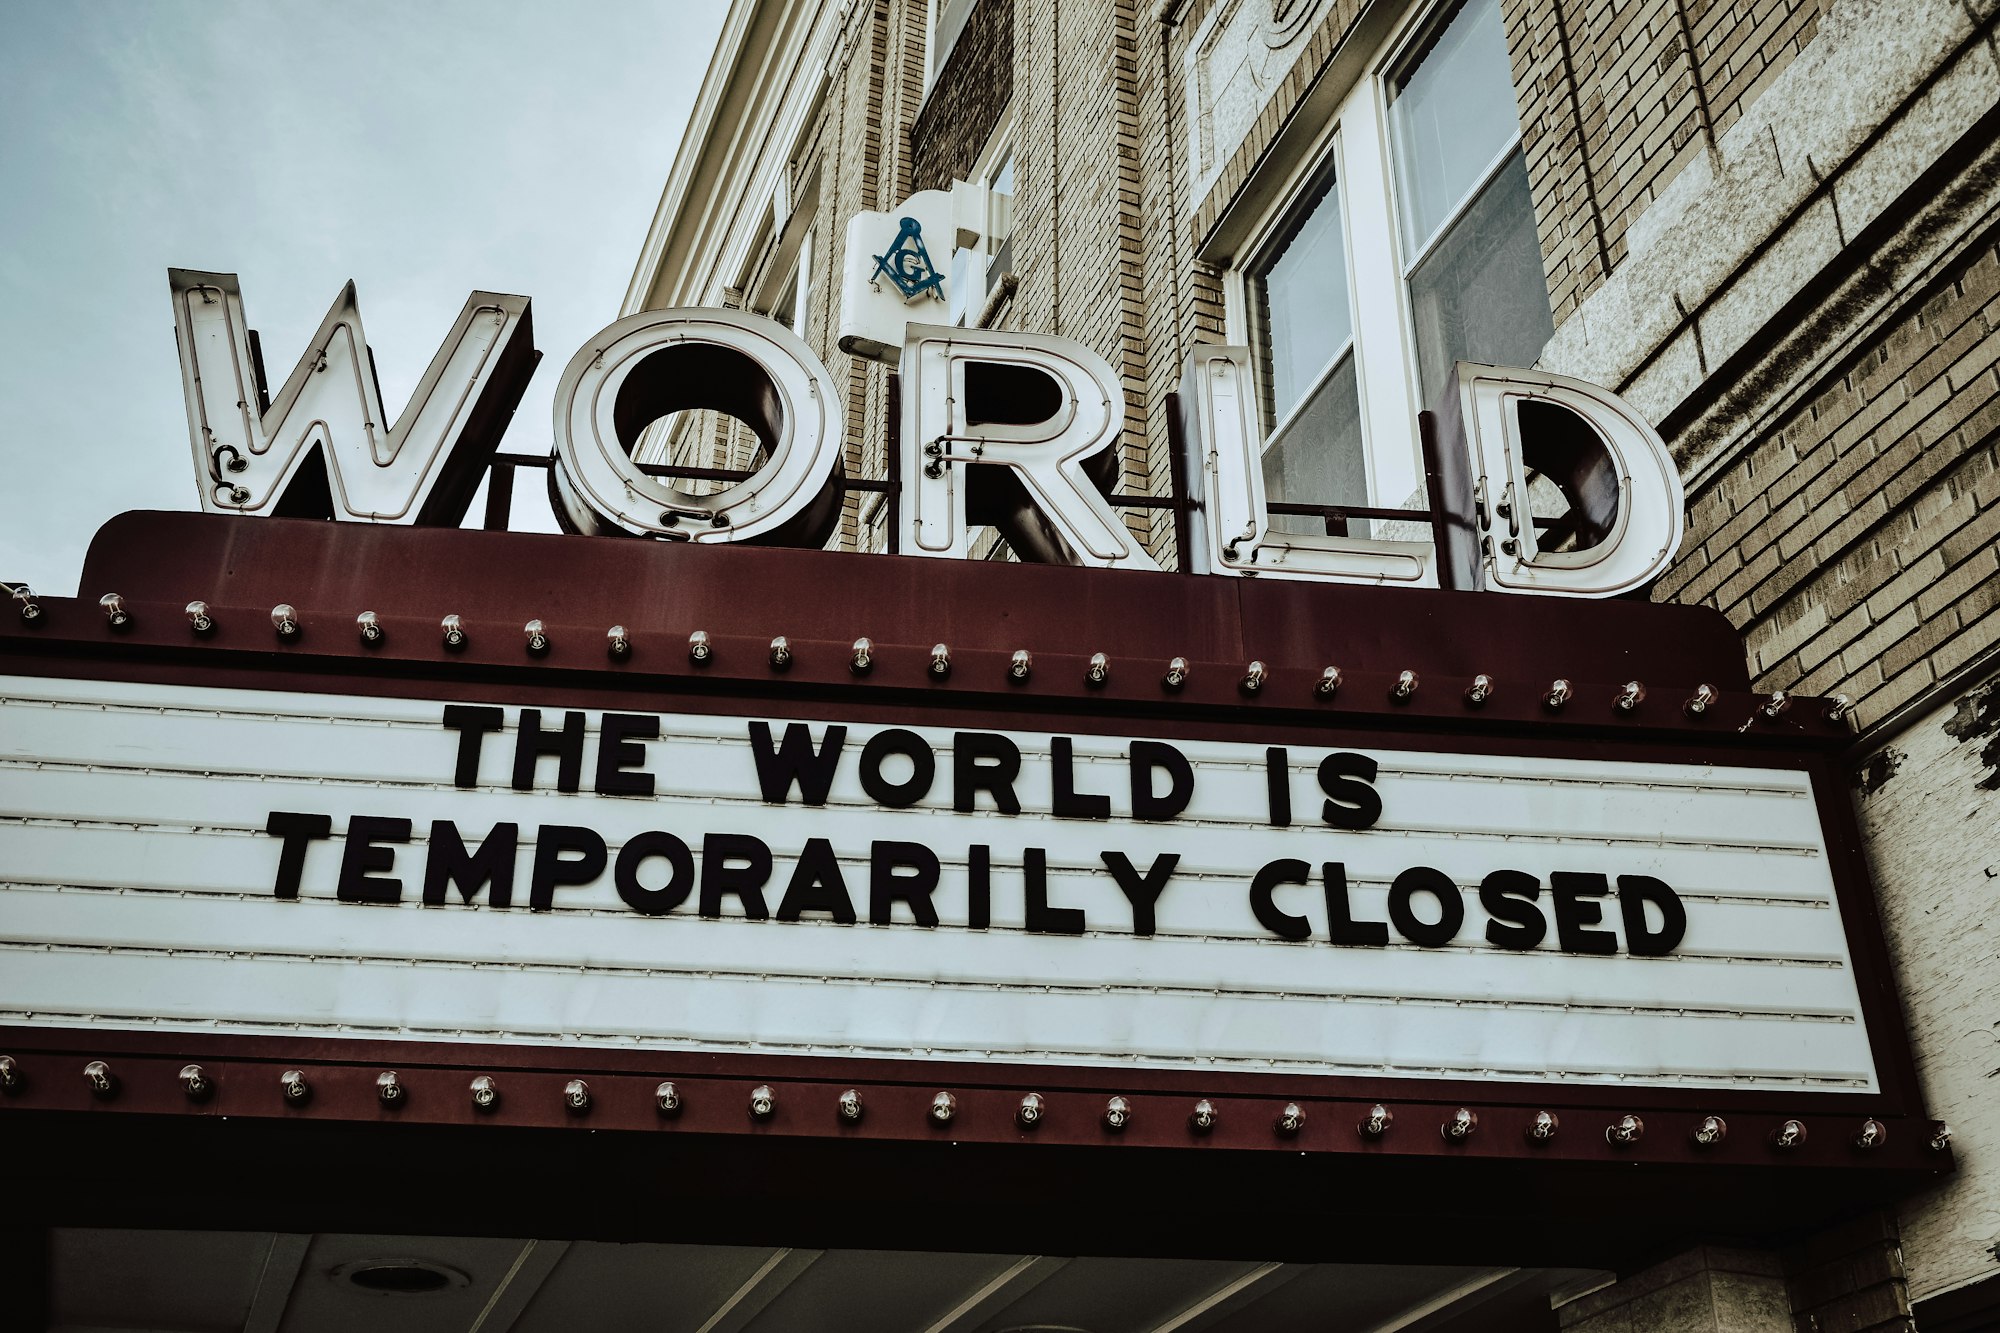 The World is Closed